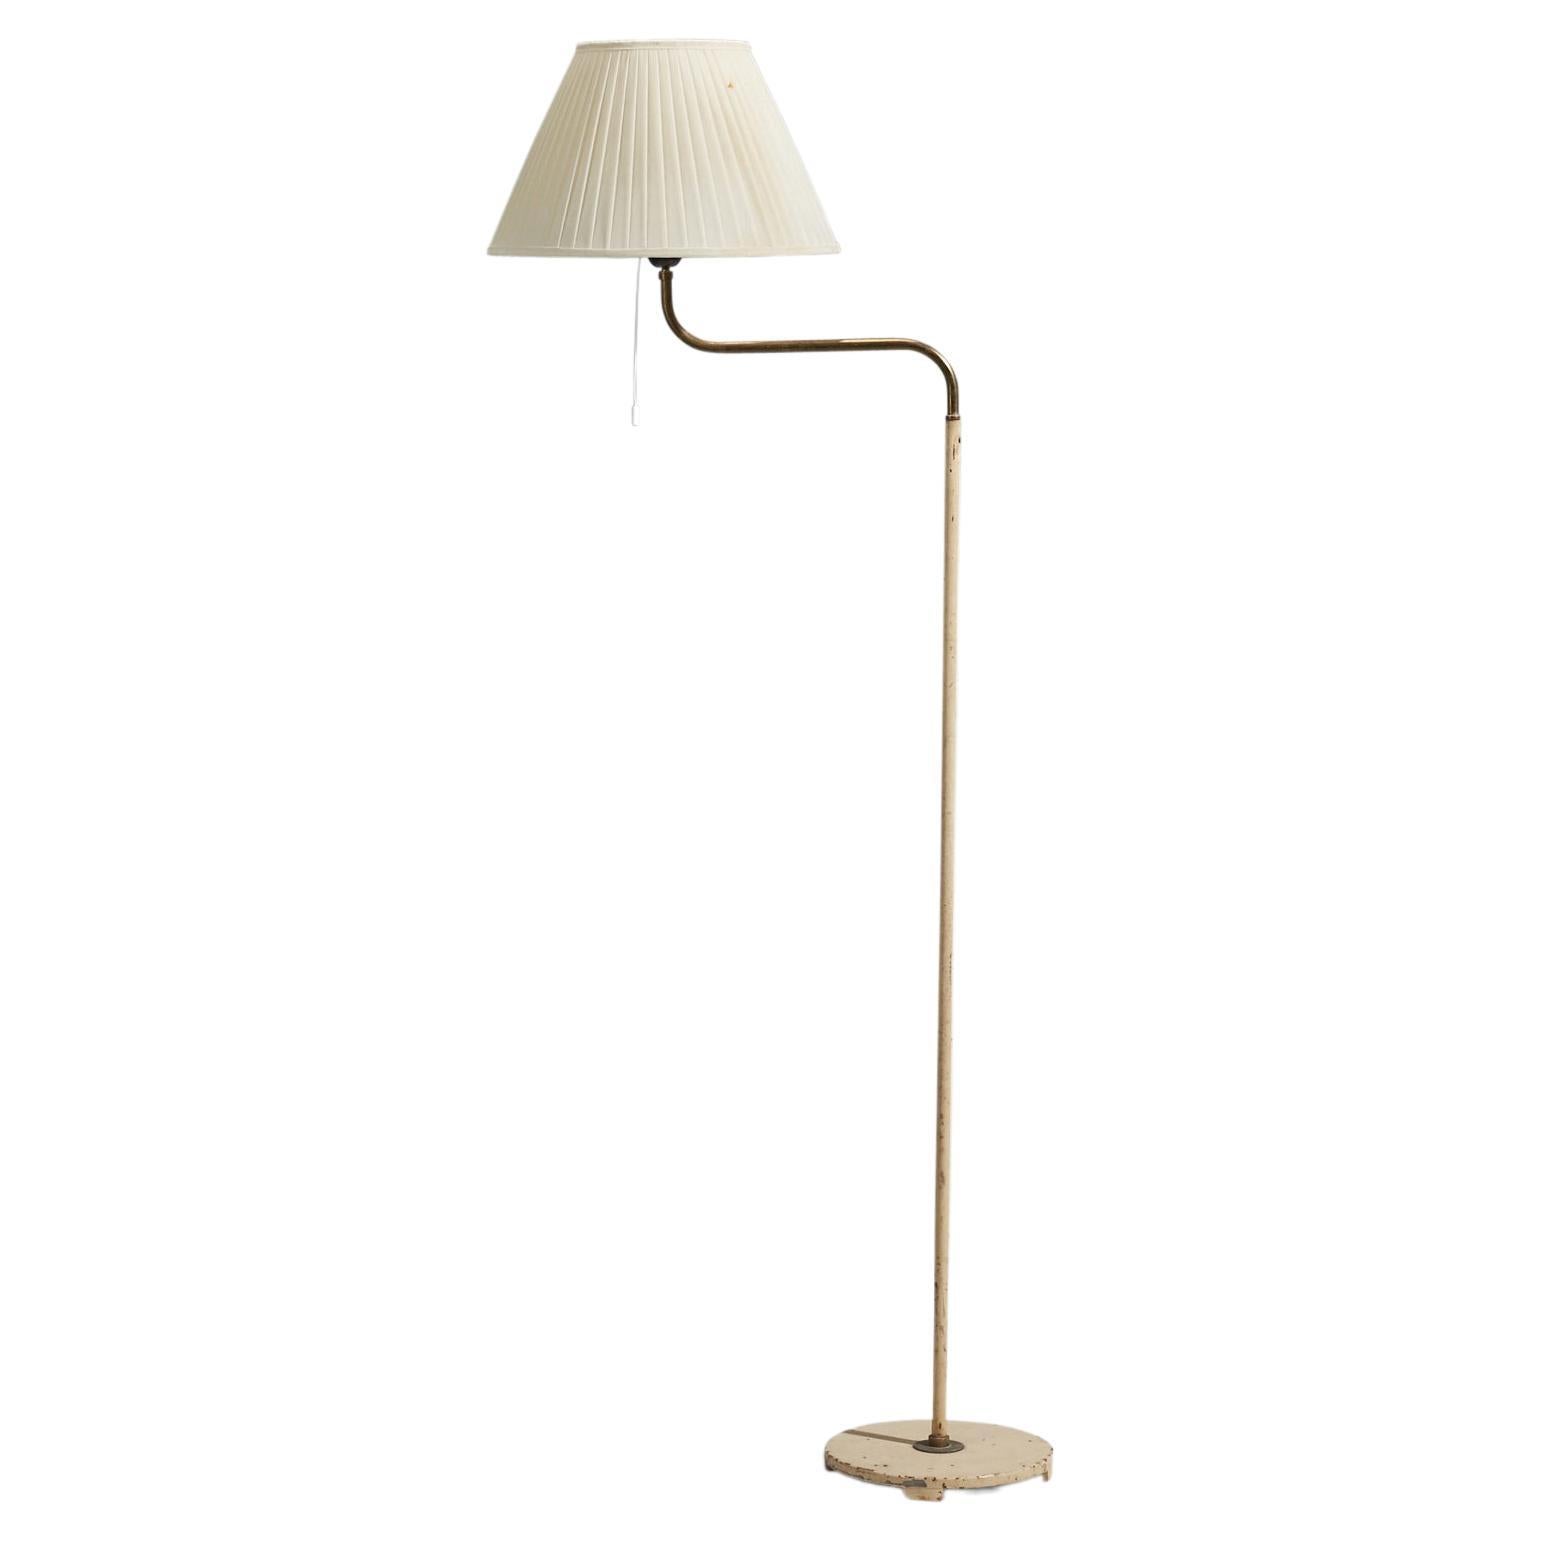 ASEA, Adjustable Floor Lamp, Brass, Grey Lacquer Metal, Fabric, Sweden, 1940s For Sale